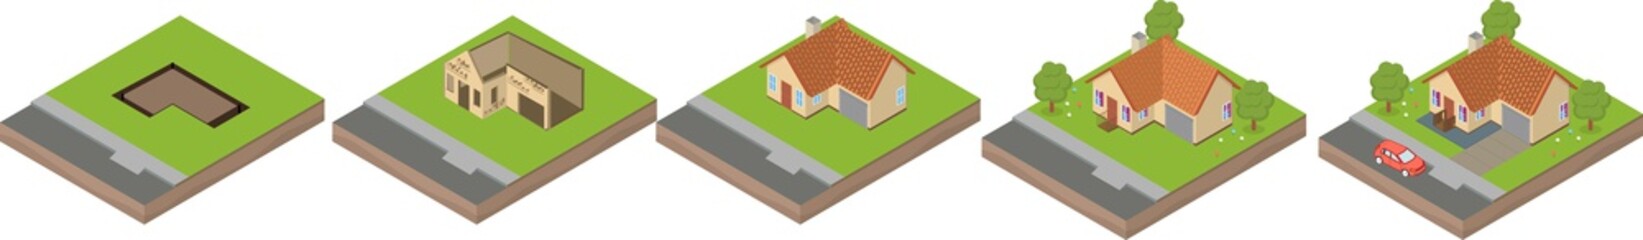 House building process. Isometric illustration of house construction. Five stages.